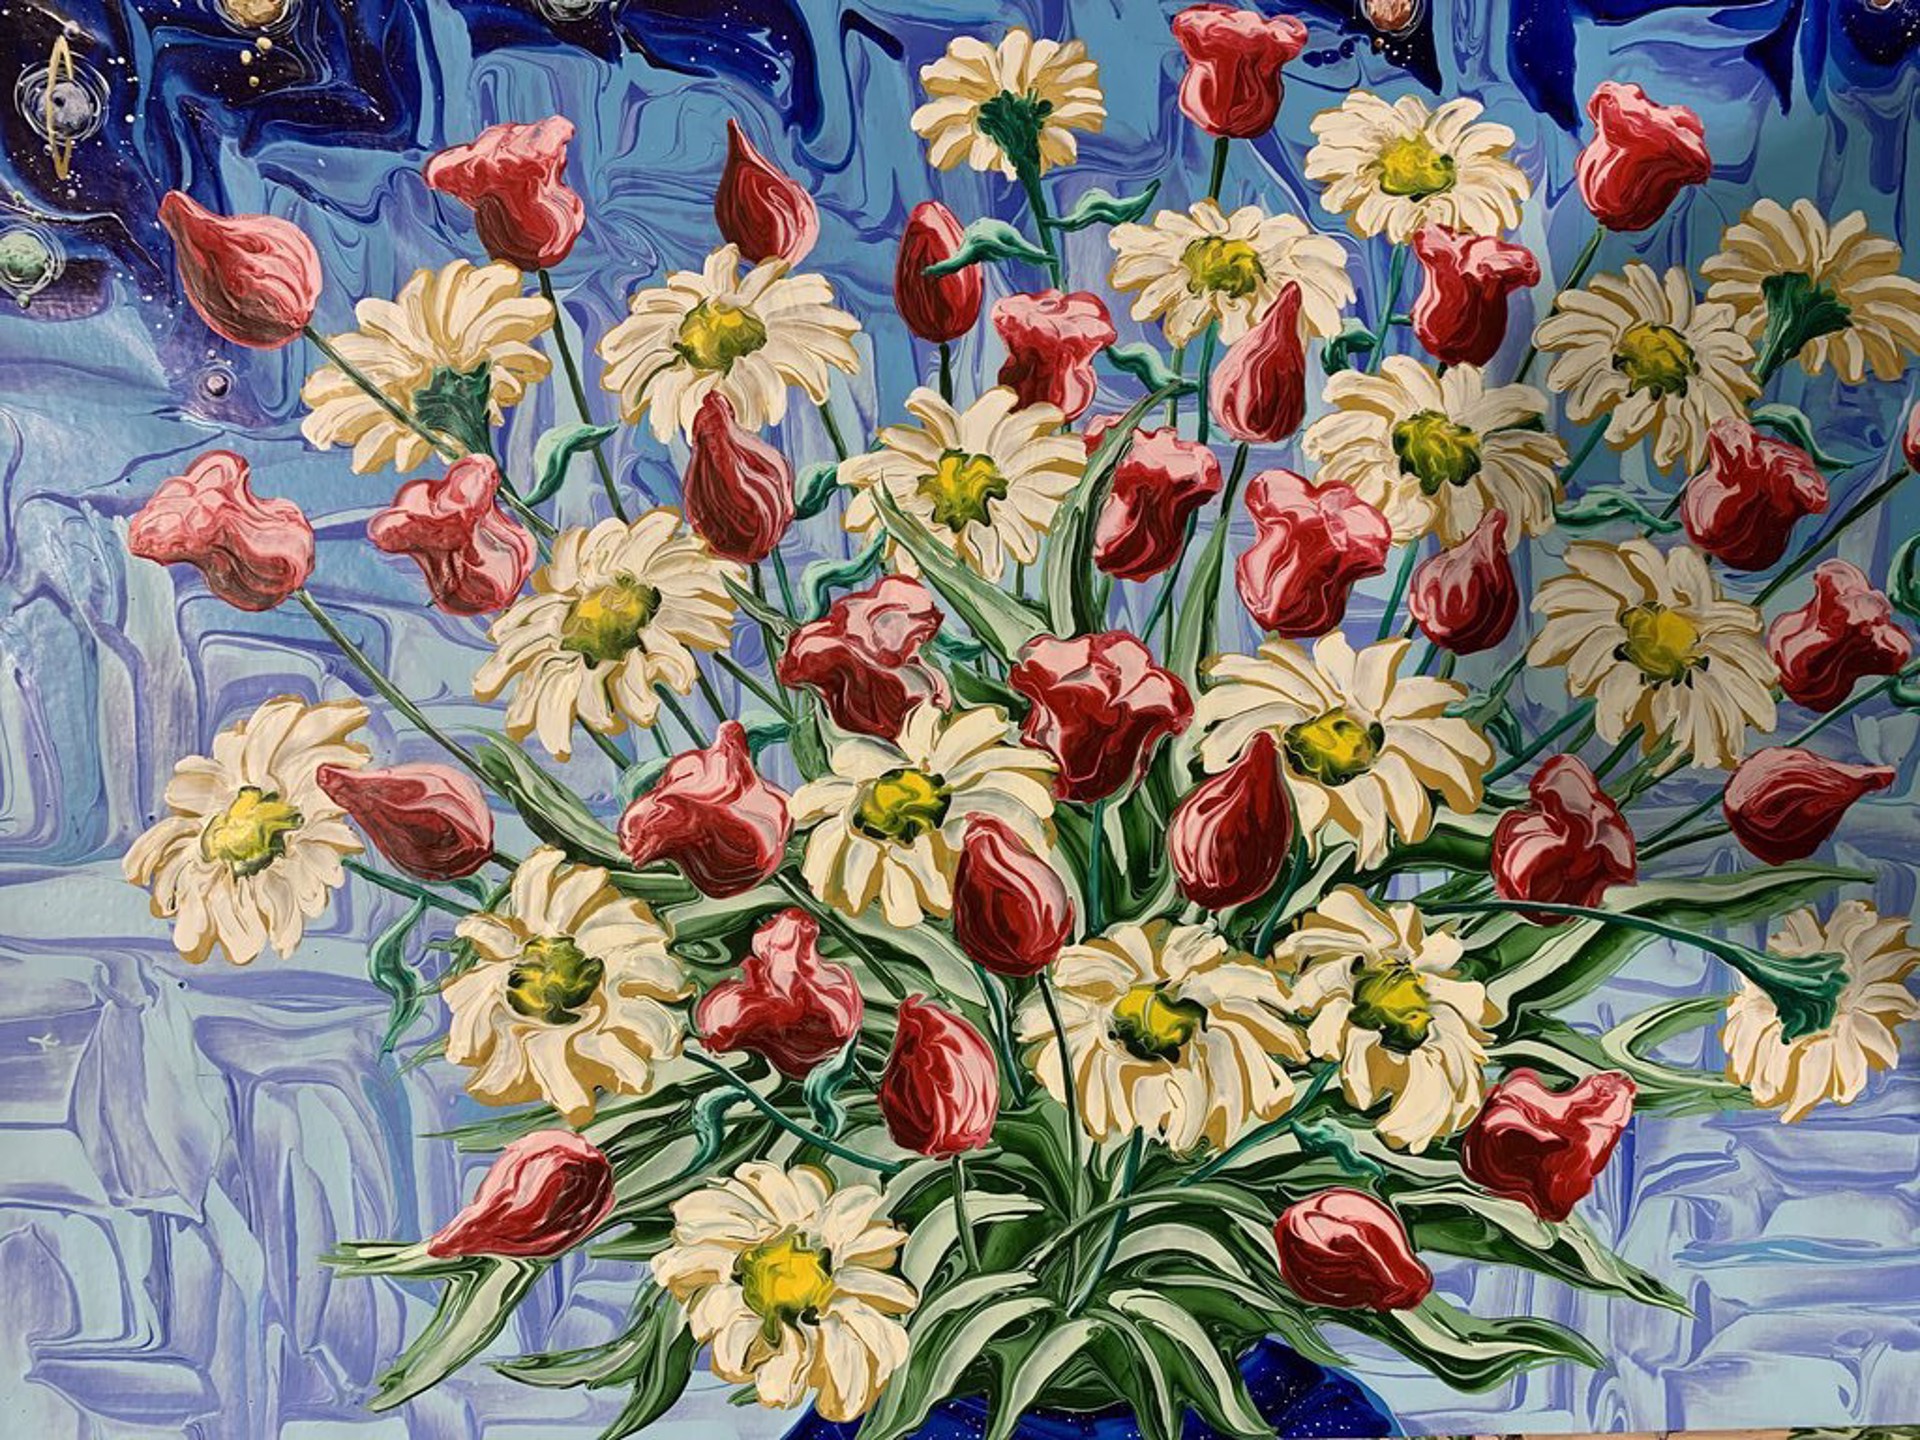 Still Life with Daisies and Tulips #2 by Gregory Horndeski